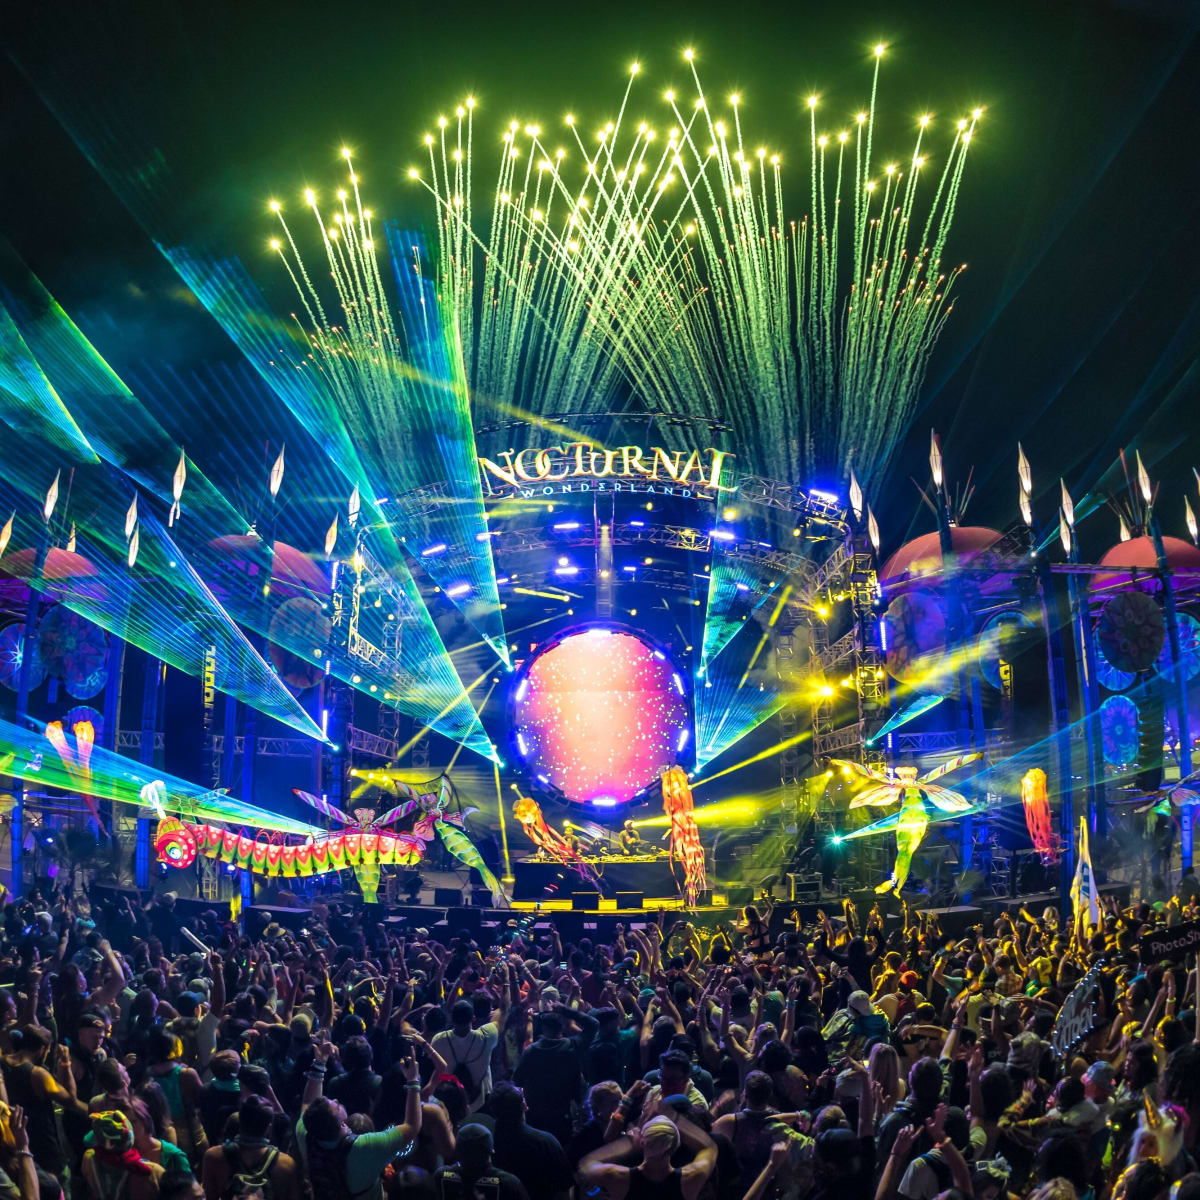 More Artists Announced for Nocturnal Wonderland 2019 Lineup -  - The  Latest Electronic Dance Music News, Reviews & Artists